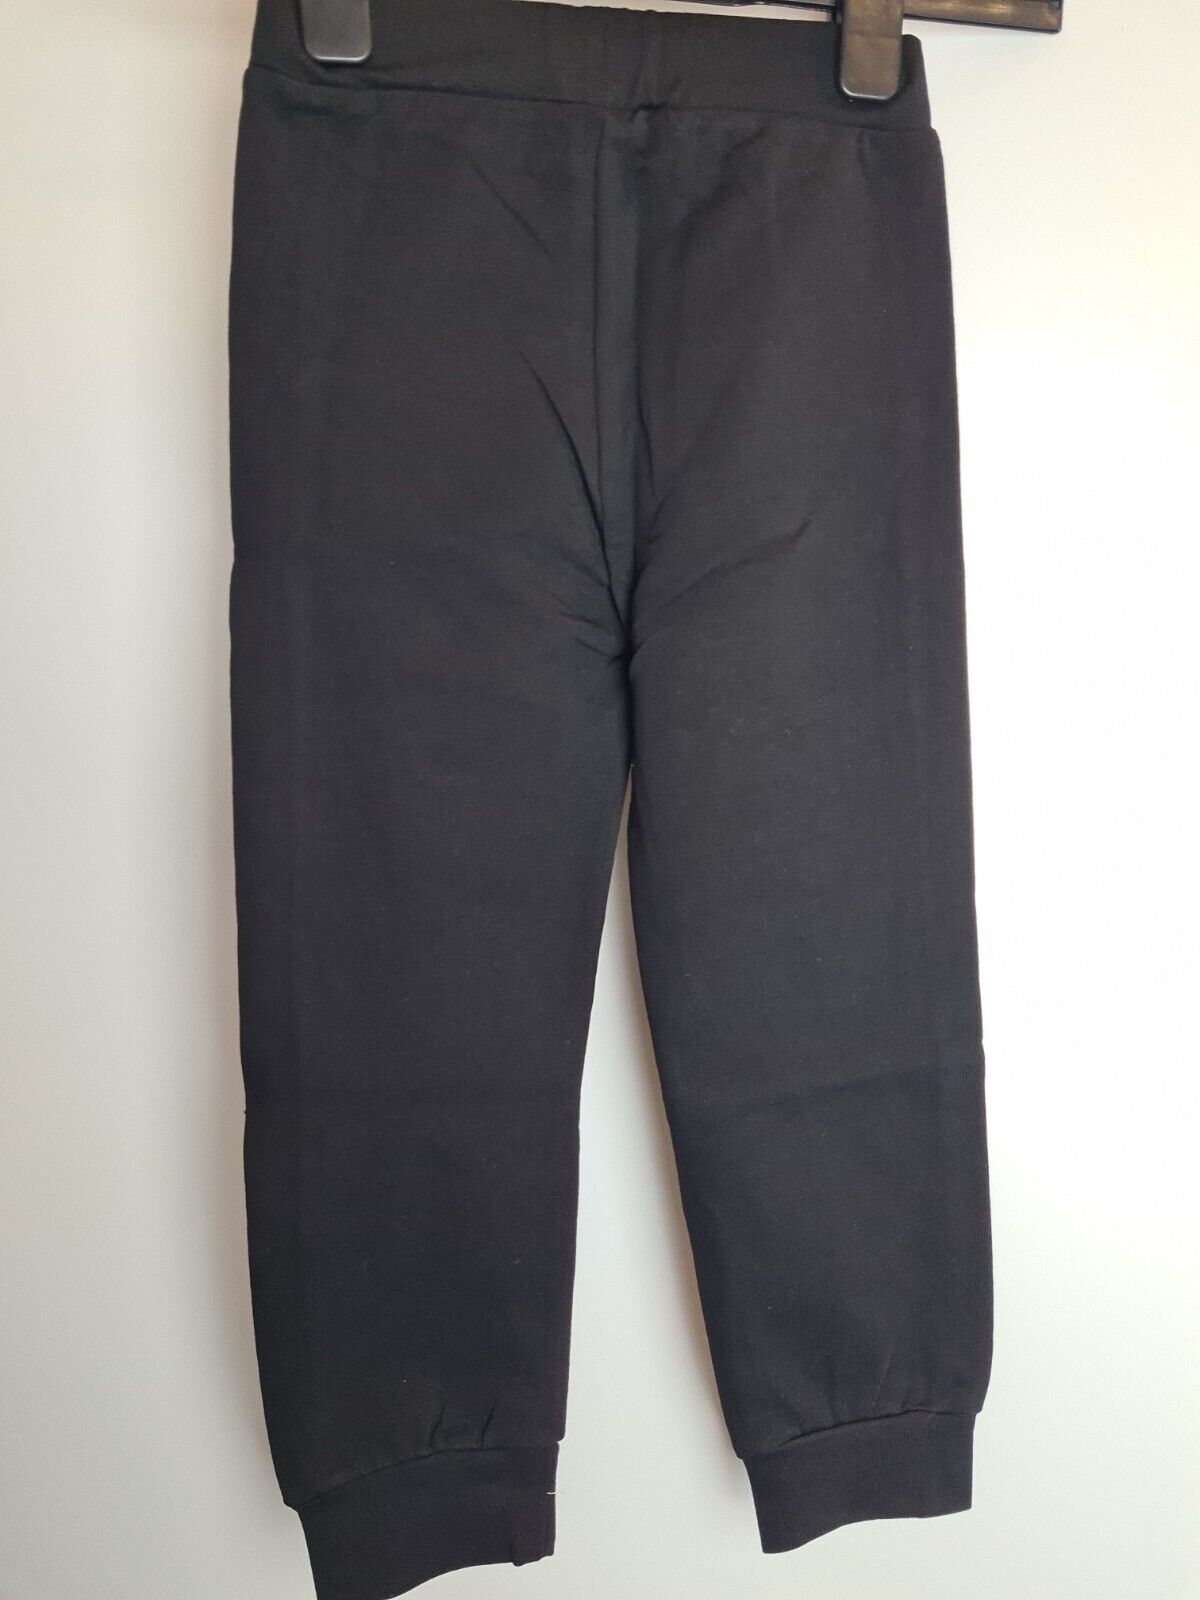 Emilio Pucci Black Tracksuit Bottoms Size 10 Years****Ref V159